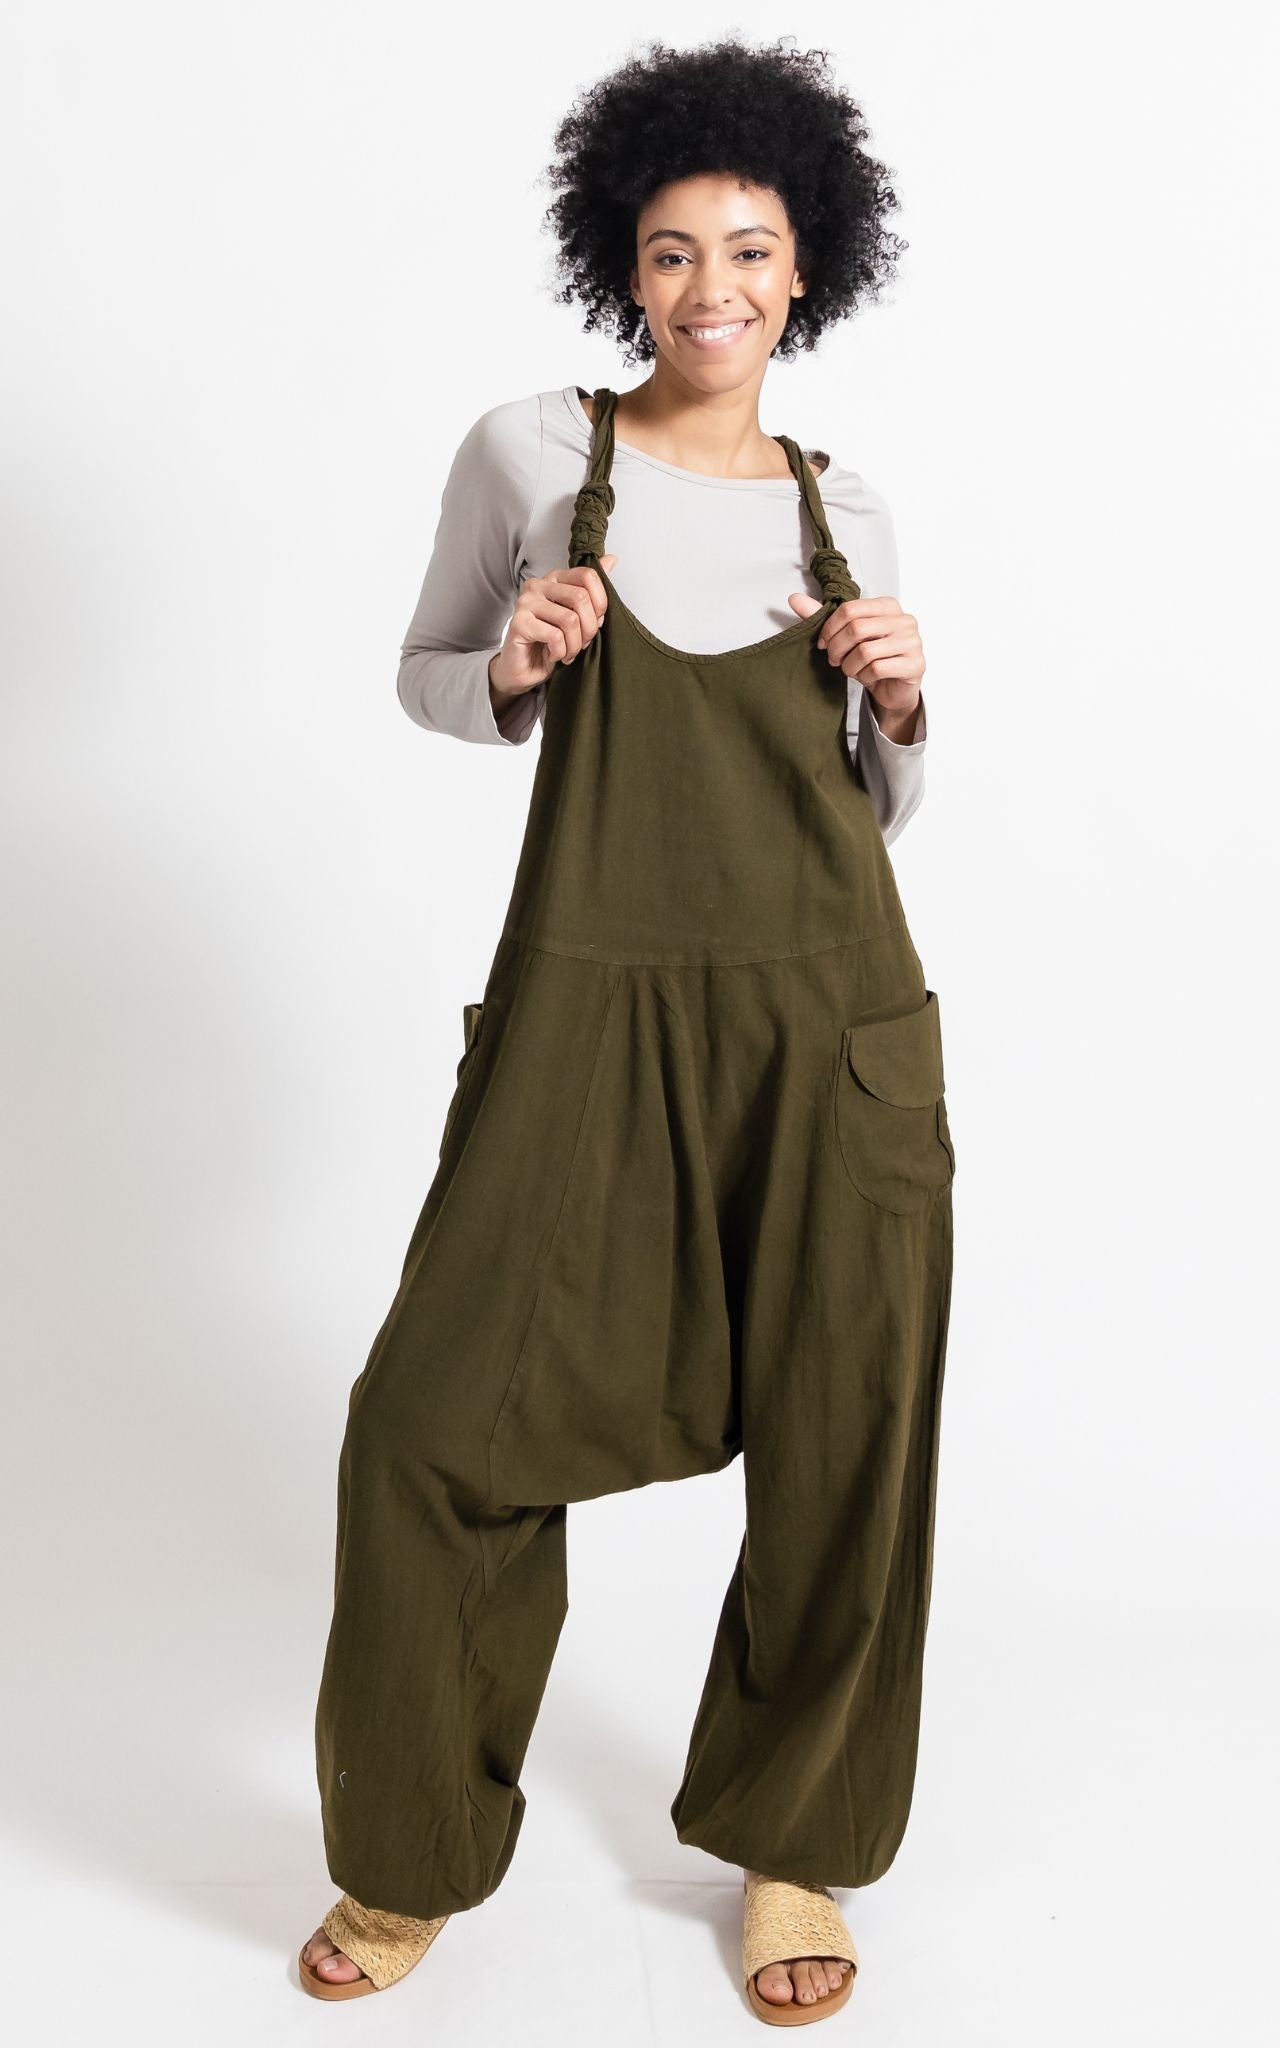 Surya Australia Ethical Cotton long 'Bahini' Overalls made in Nepal - Green